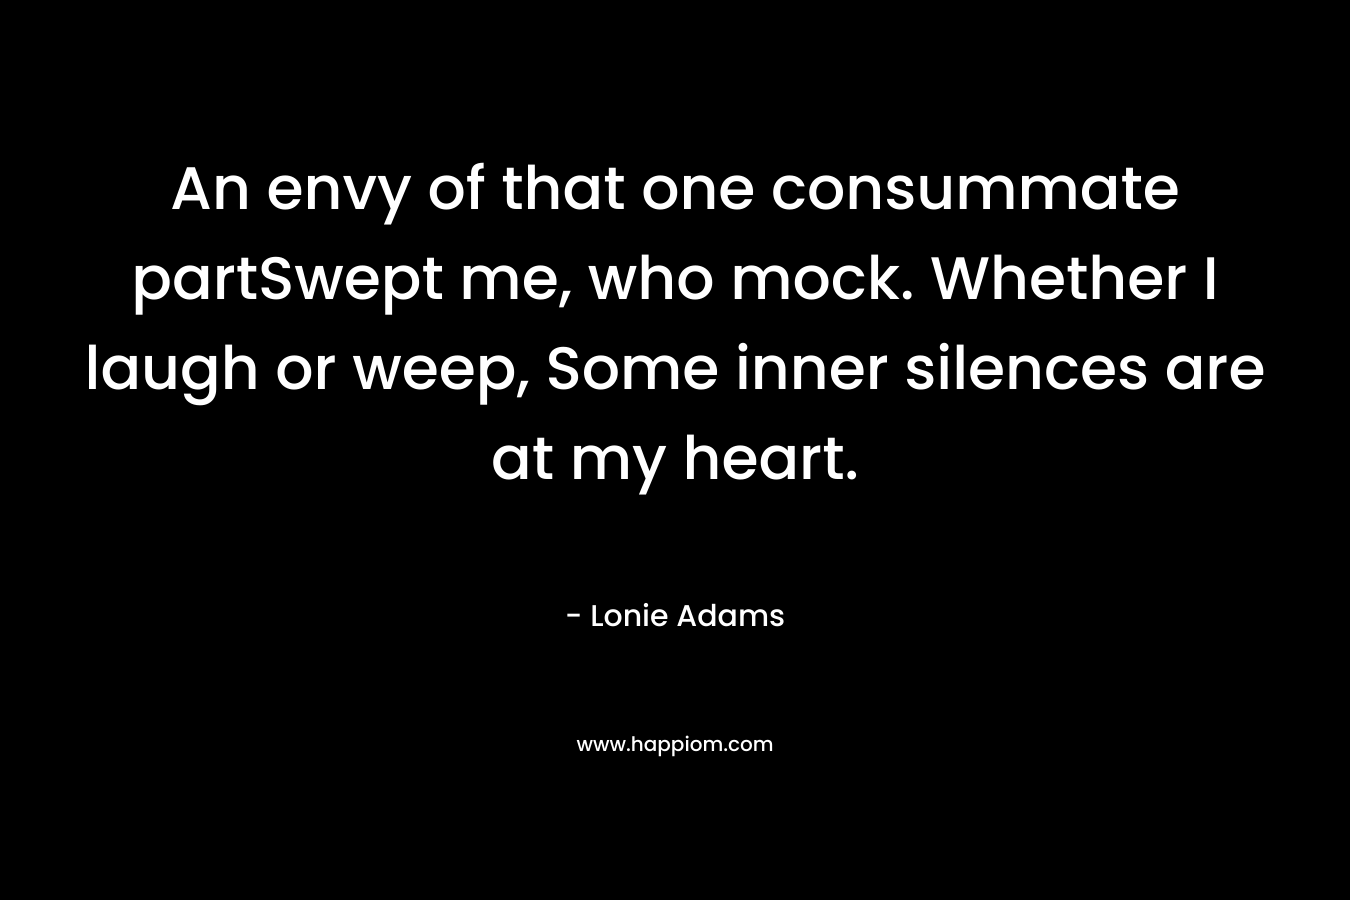 An envy of that one consummate partSwept me, who mock. Whether I laugh or weep, Some inner silences are at my heart. – Lonie Adams